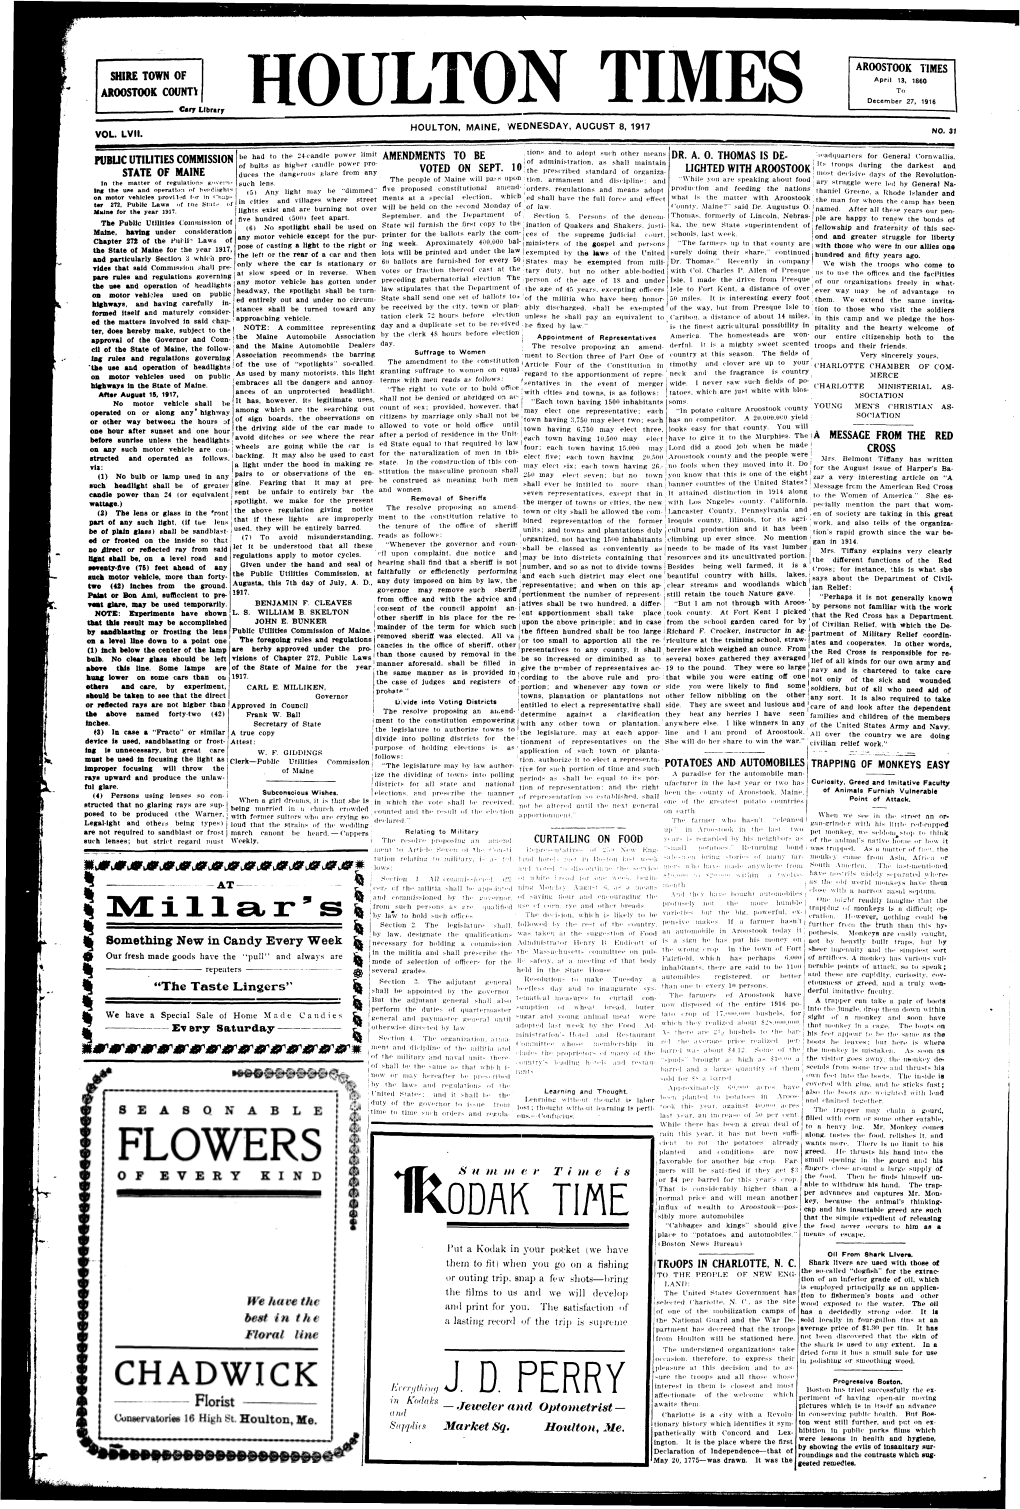 Houlton Times, August 8, 1917